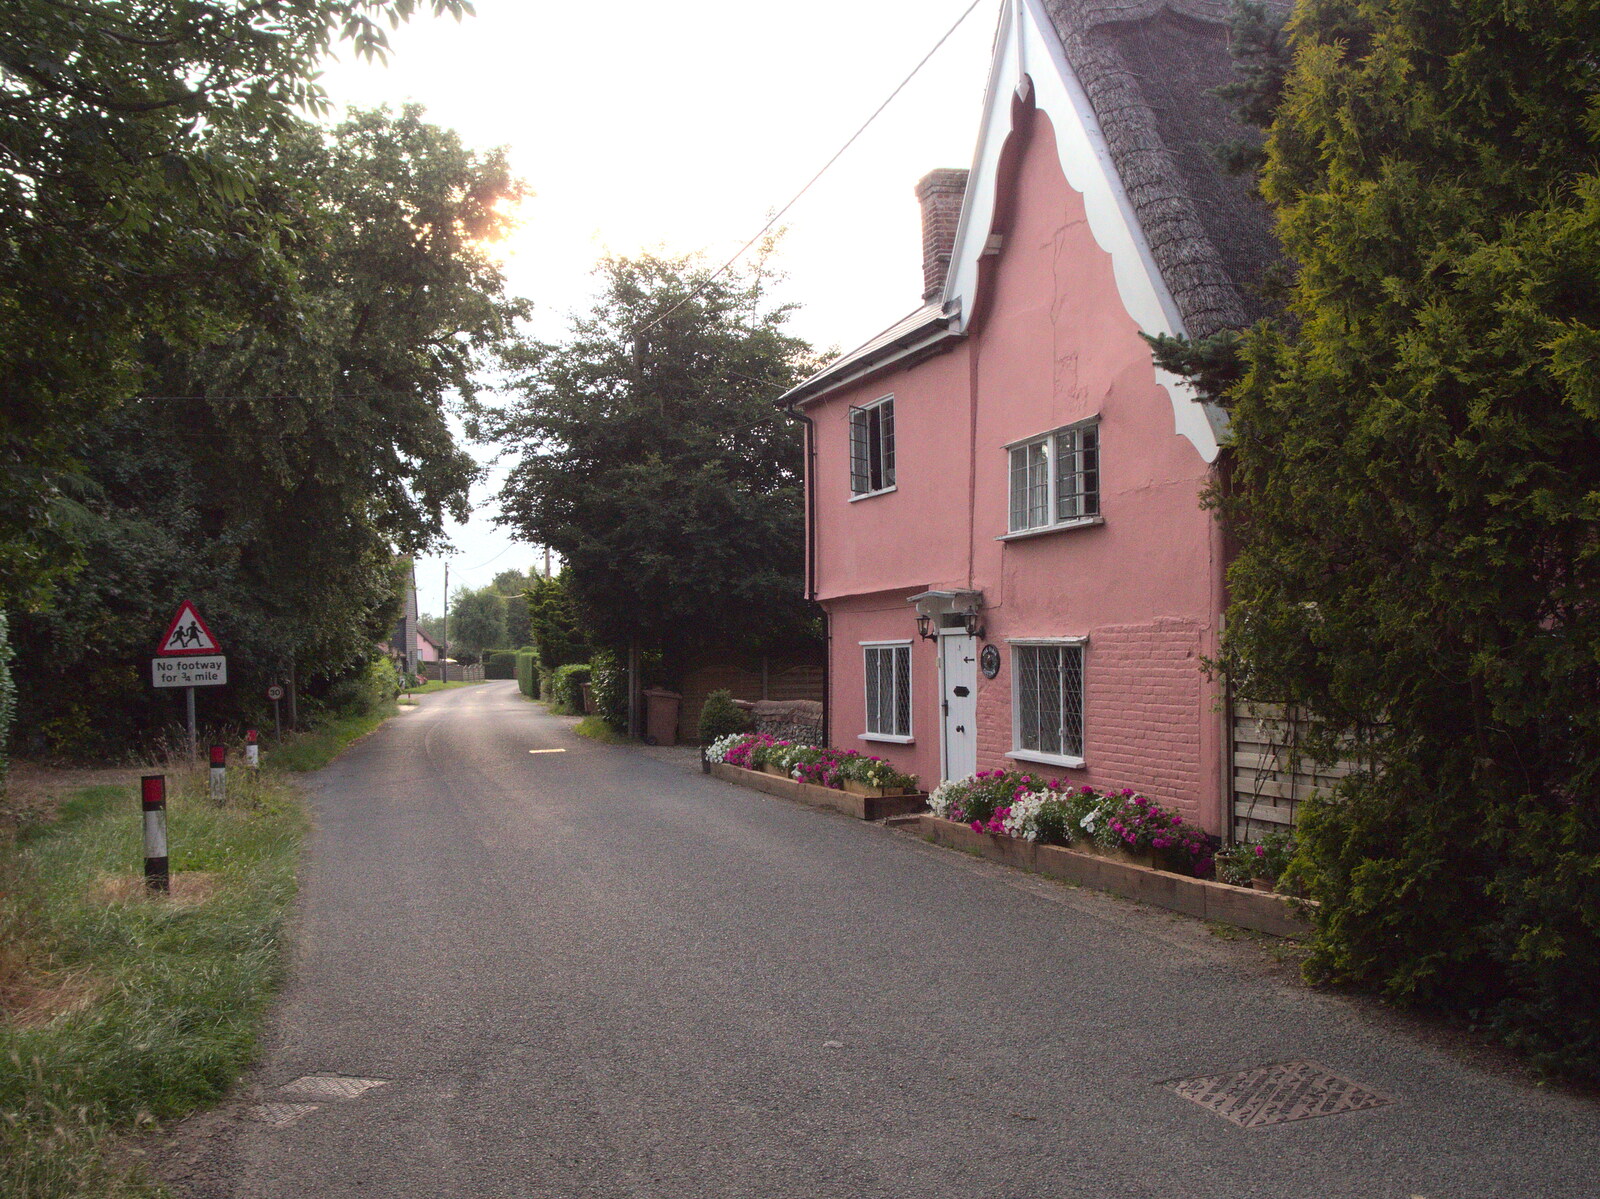 Mill Street in Gislingham from The BSCC at The Crown, Gissing, Norfolk - 22nd July 2021